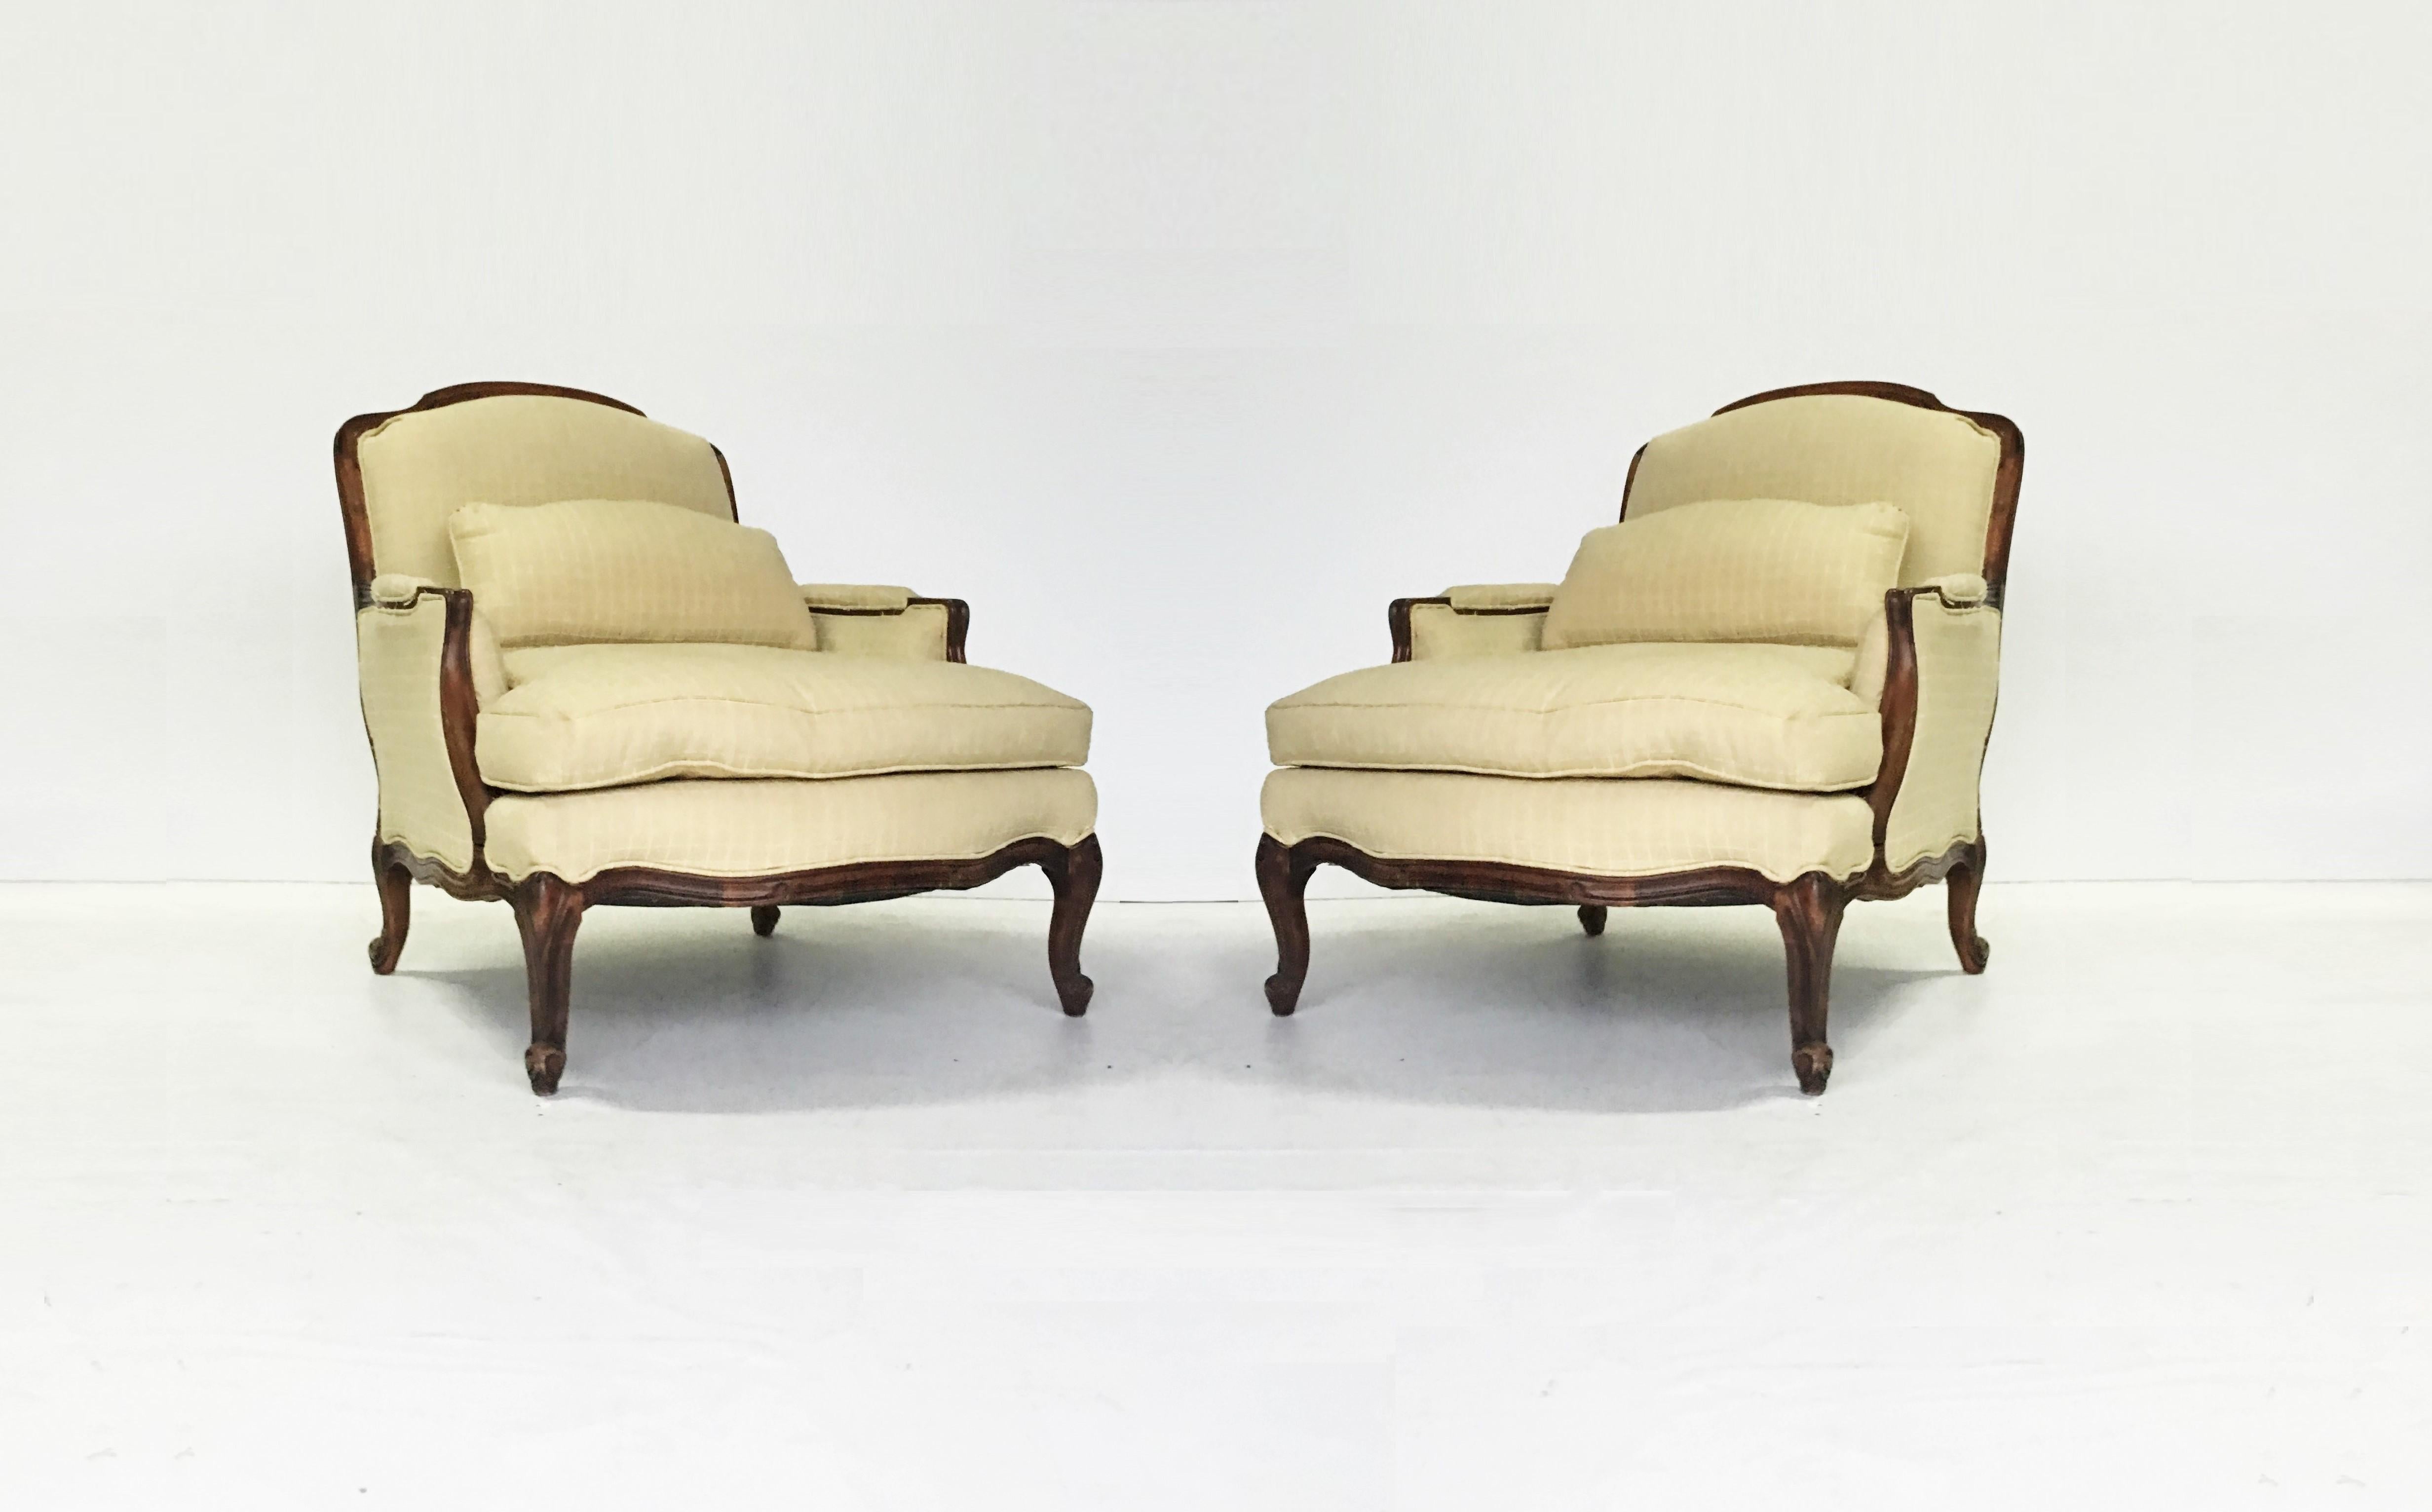 Wonderful pair of Louis XV style bergère chair and ottoman set. Featuring wide upholstered frames, with padded scroll arms on classic cabriole legs headed by carved floral motif. Can be used as is but upholstery is recommended.
Chair size 36 in H x